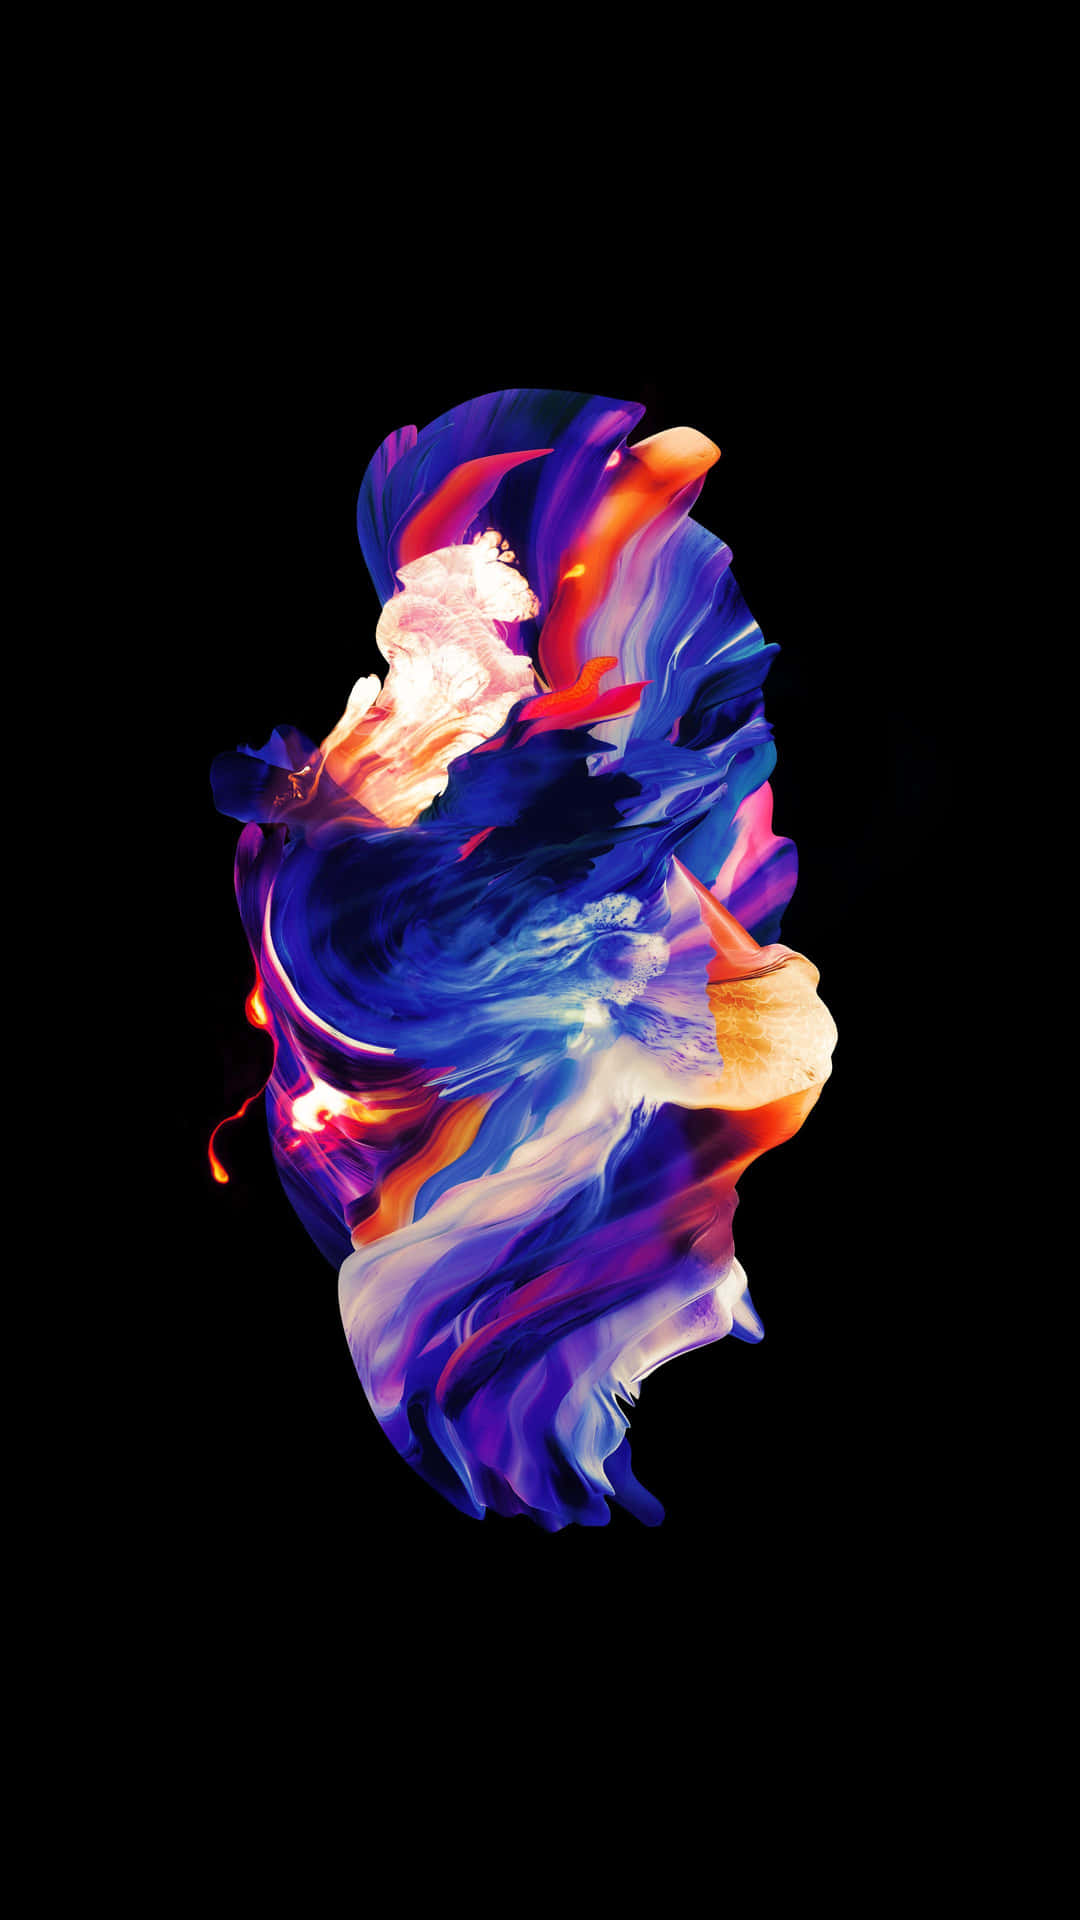 A Colorful Abstract Painting On A Black Background Wallpaper